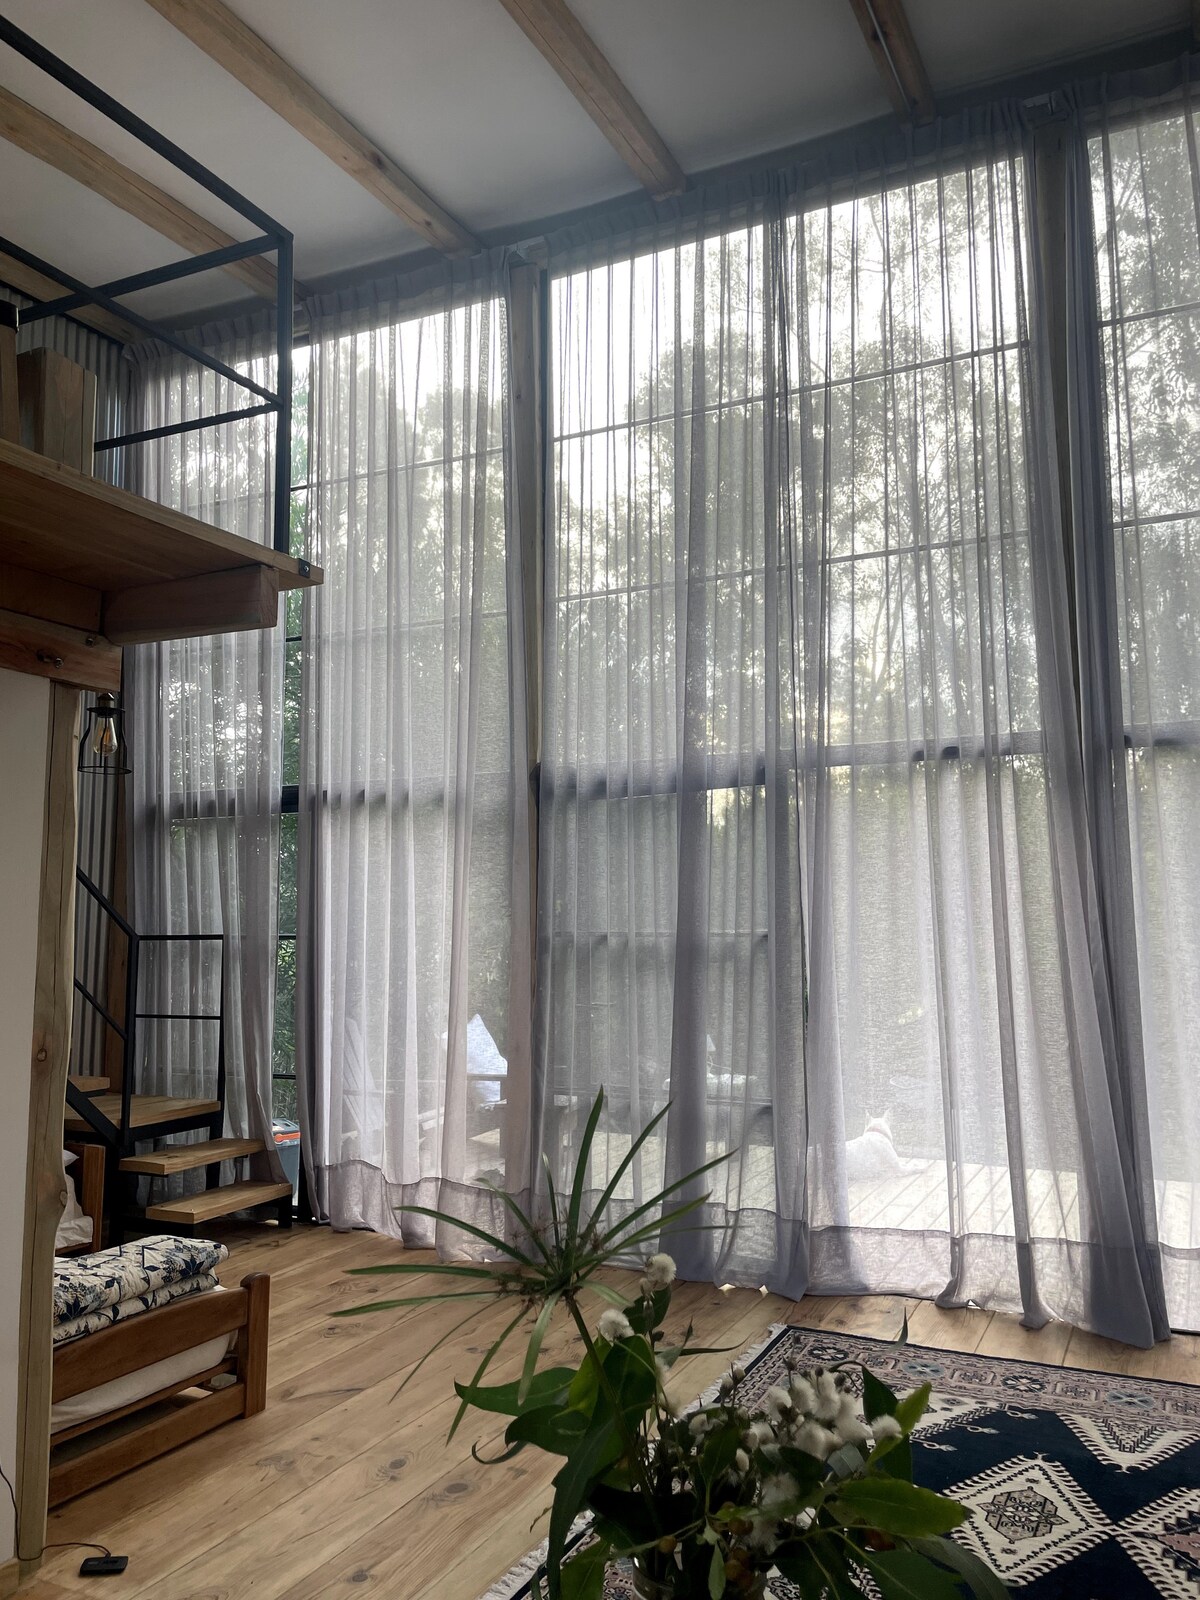 A Loft in the Forest - La Barra